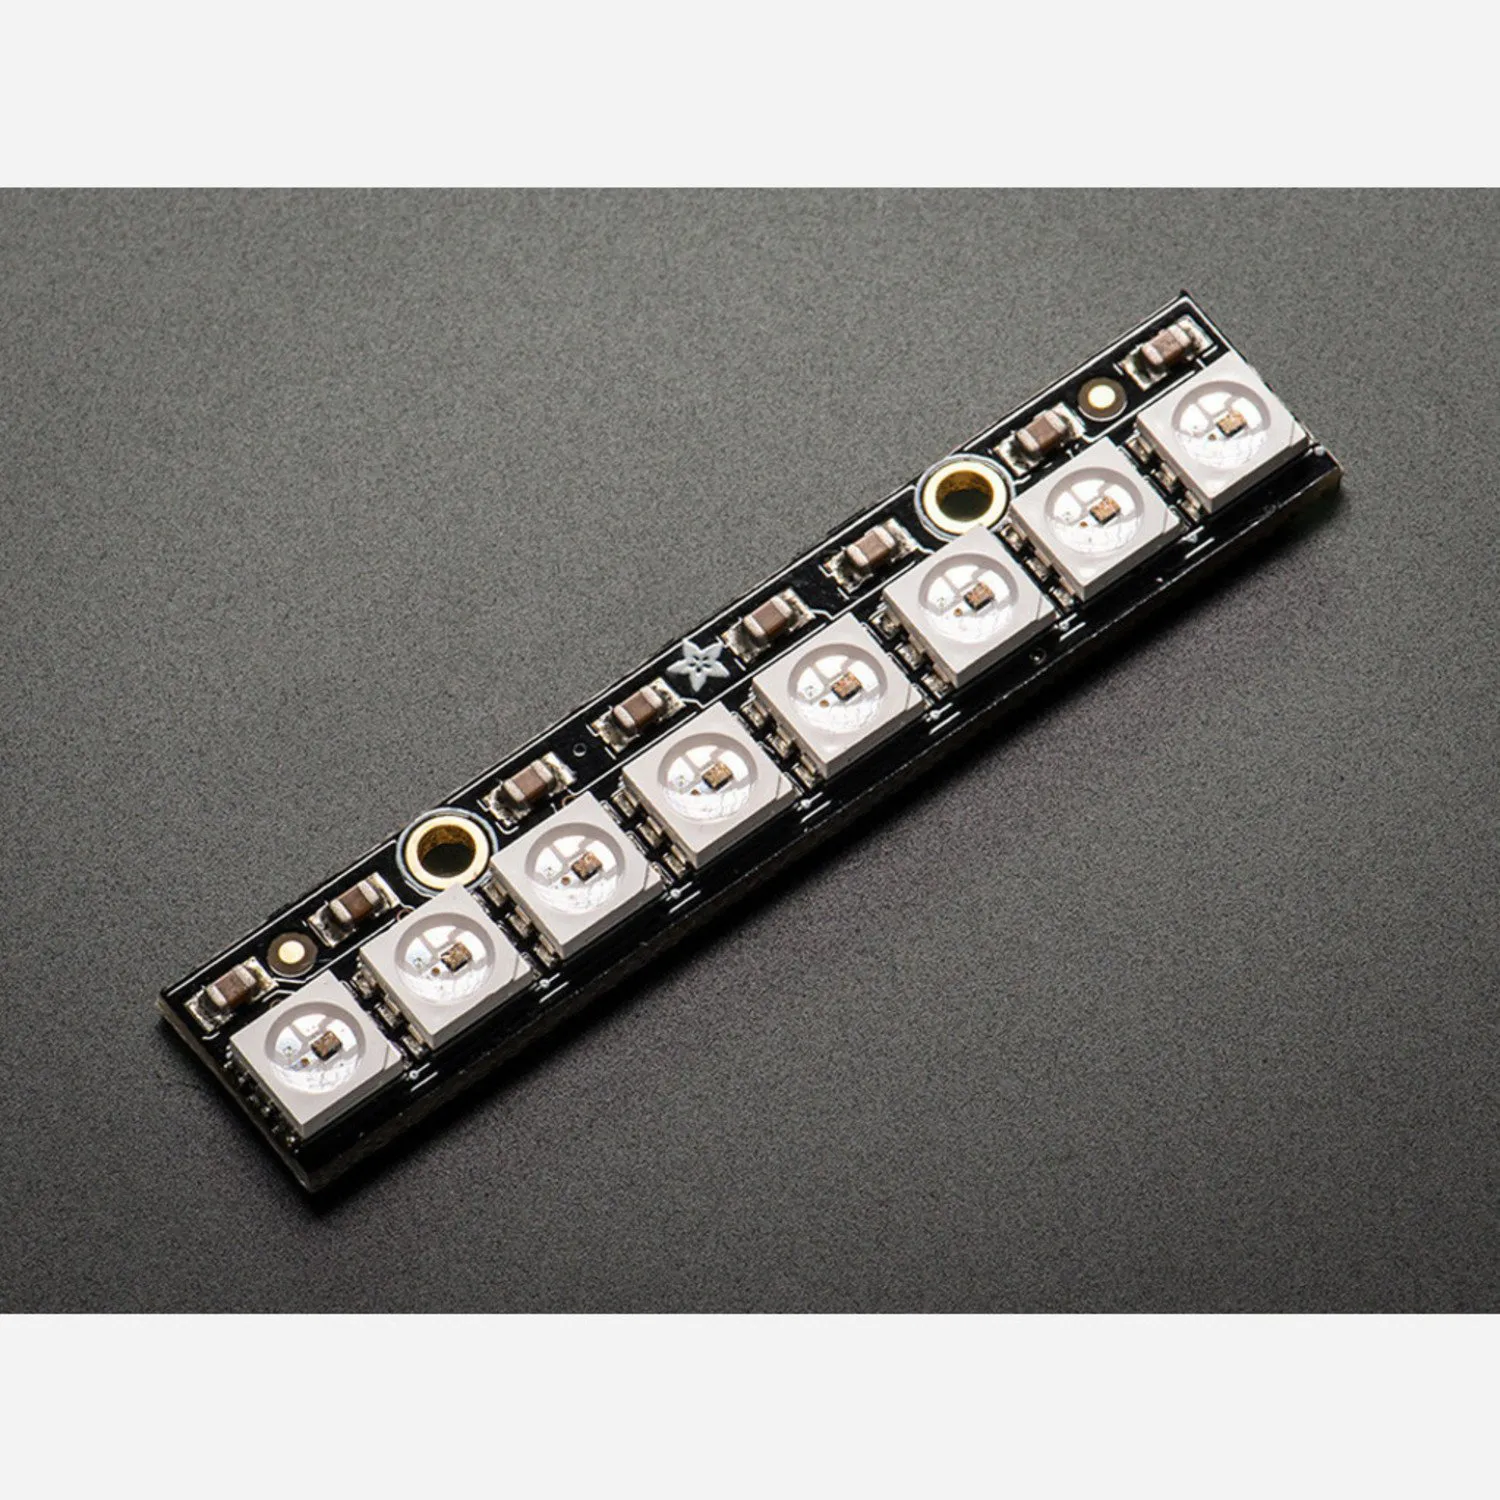 Photo of NeoPixel Stick - 8 x 5050 RGB LED with Integrated Drivers